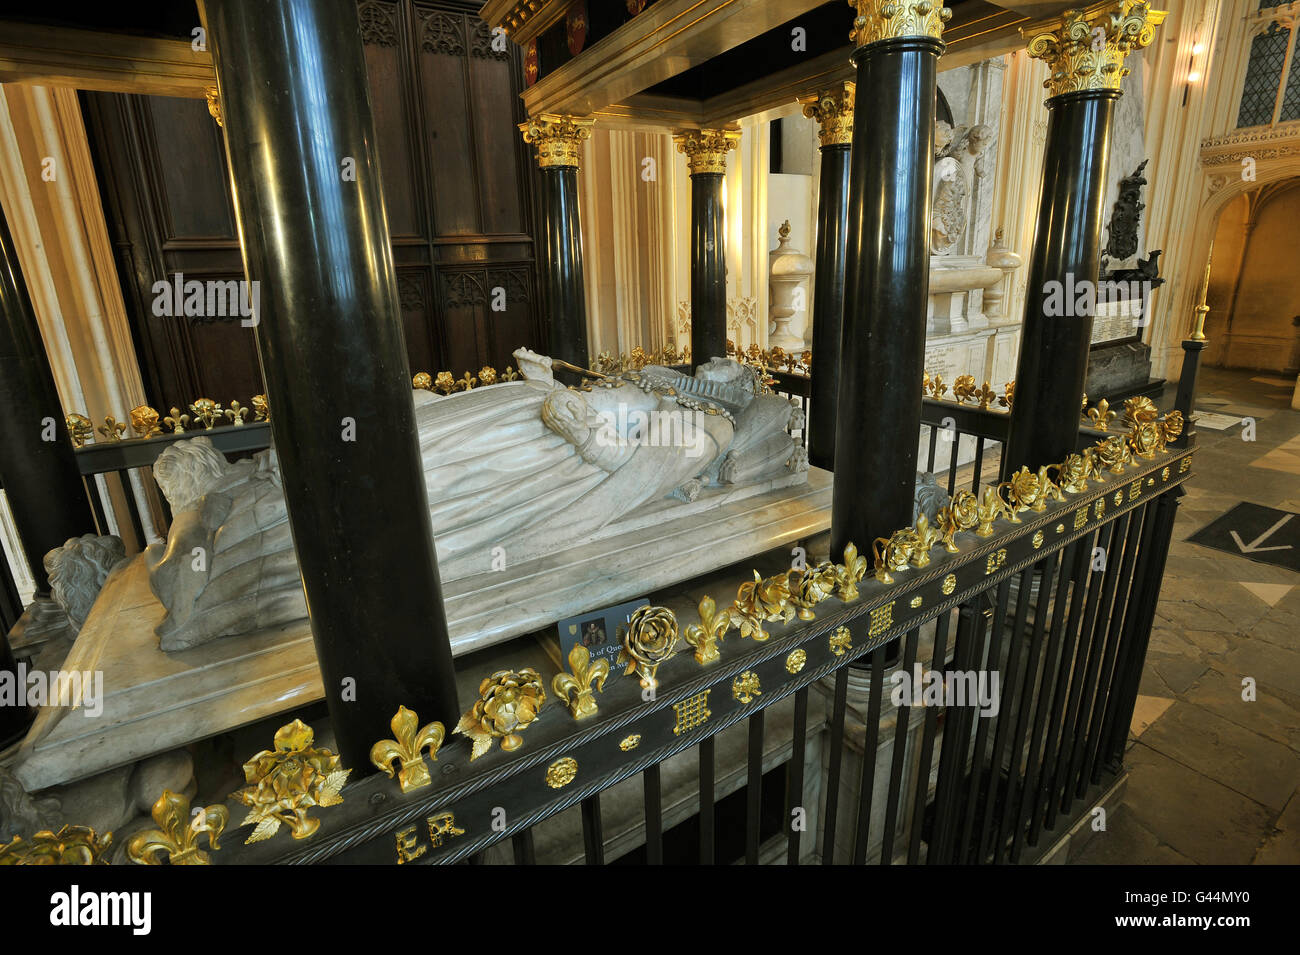 The Tomb of Queen Elizabeth I in Westminster Abbey central London. Stock Photo